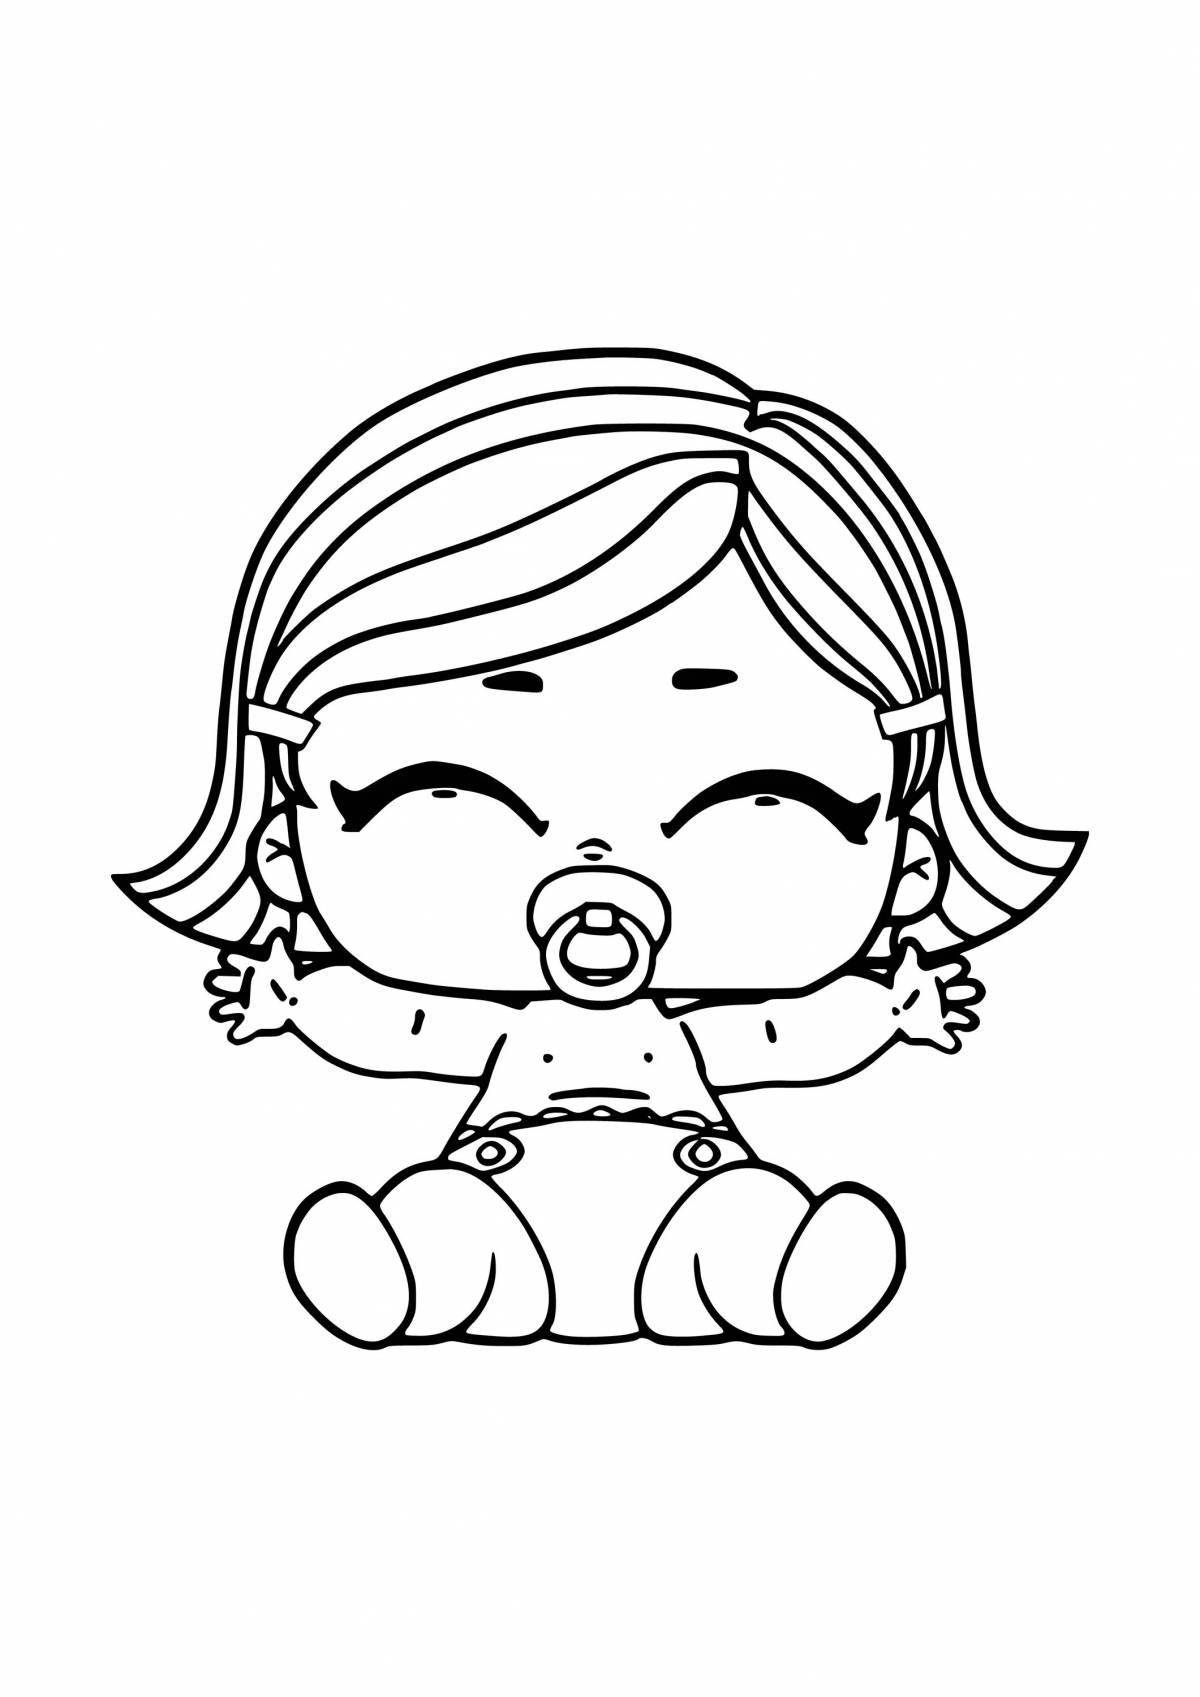 Exquisite lol kids doll coloring pages